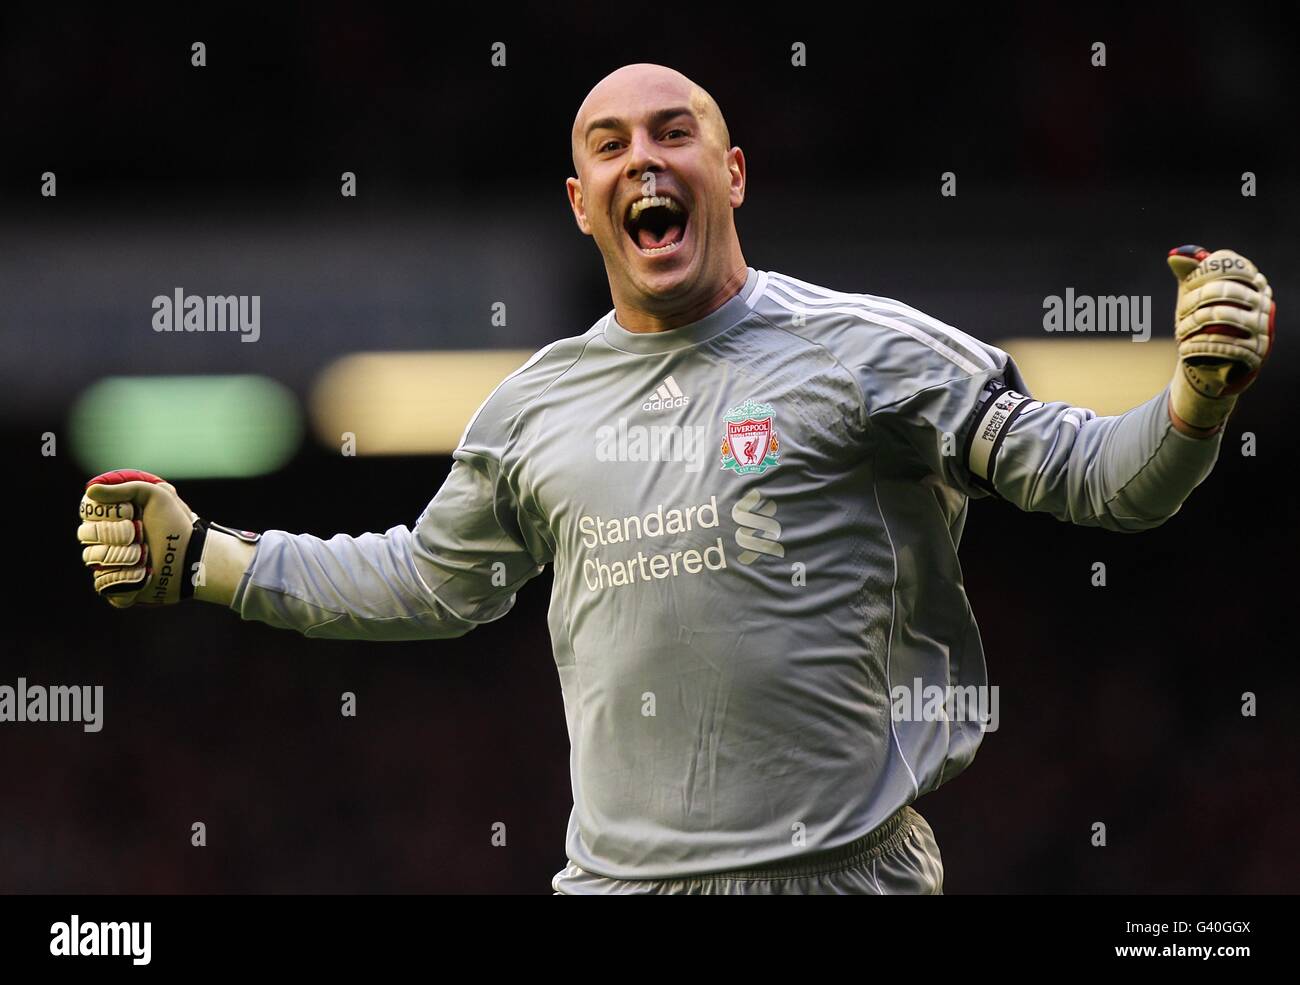 Soccer - Barclays Premier League - Liverpool v Everton - Anfield. Liverpool goalkeeper Jose Pepe Reina celebrates after team-mate Raul Meireles scores the first goal of the game Stock Photo